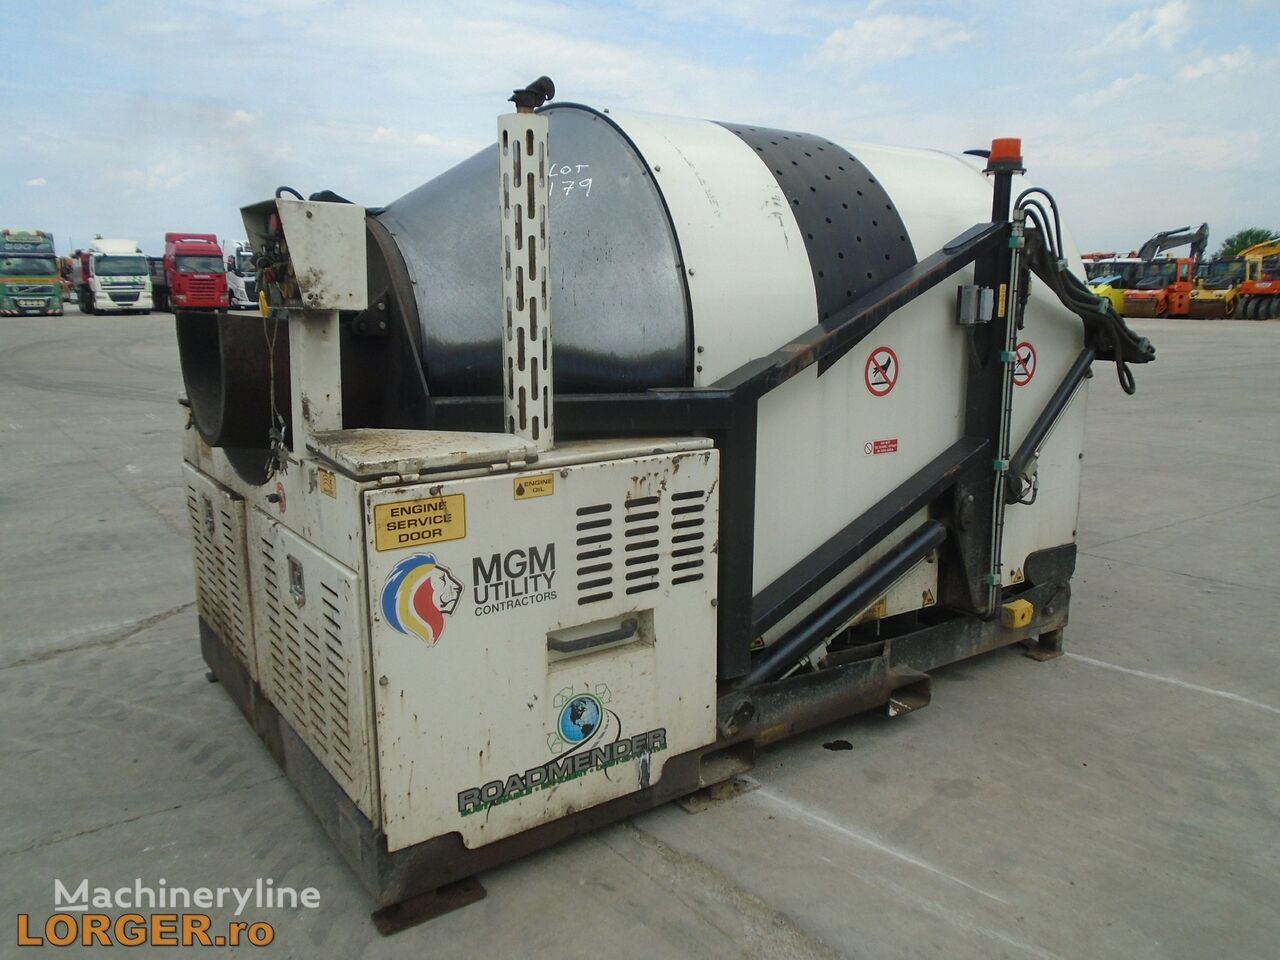 Road Mender DBP500 recycling machine